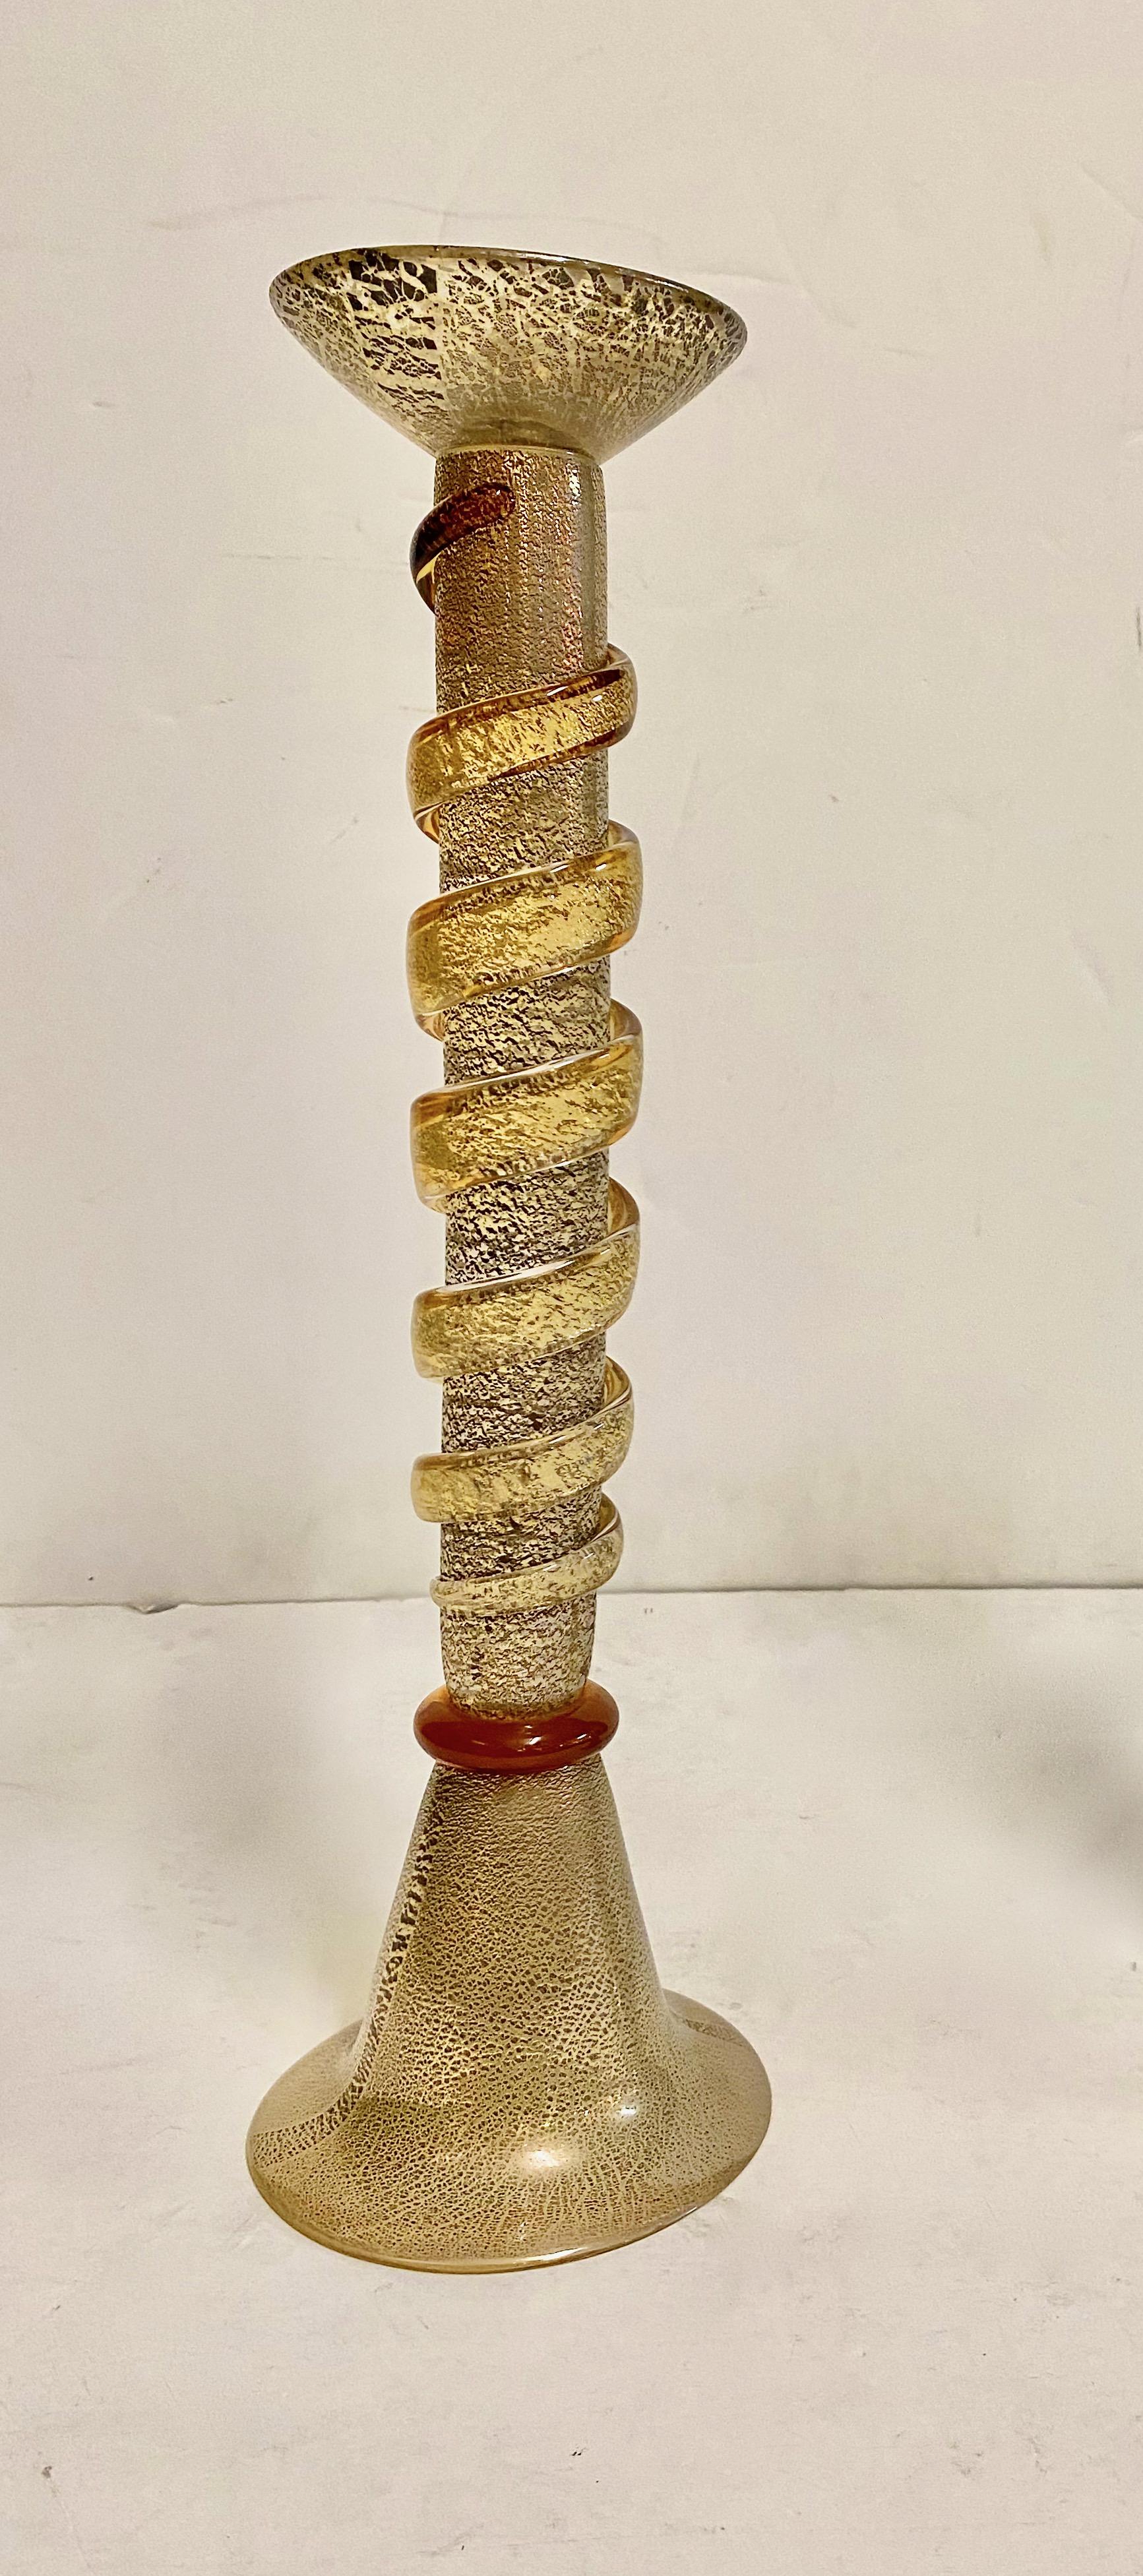 This is a stunning large pair of Murano candlesticks in the style of Memphis Milano, a design group founded and headed by Ettore Sottsass that was active between 1980 and 1987. The whimsical form of the tall balusters entwined by an abstract